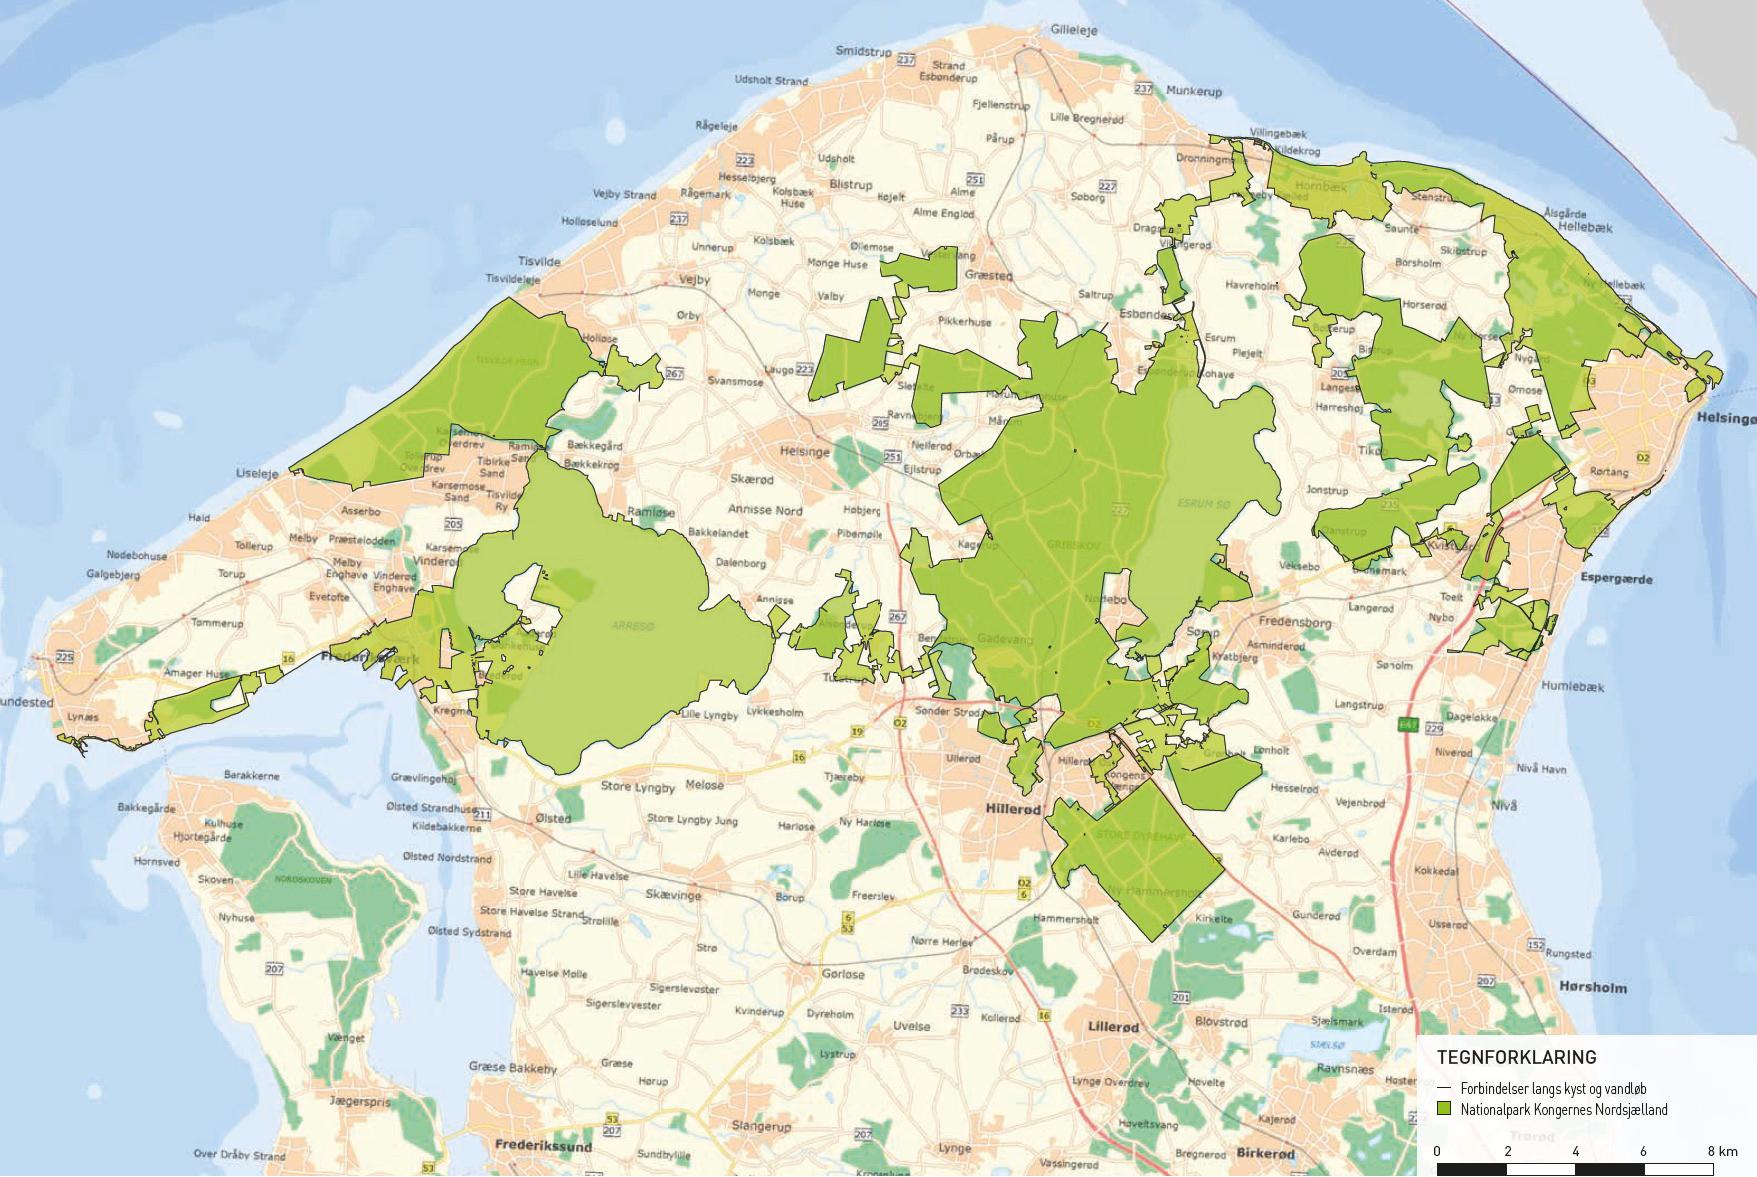 The map of the proposed National Park Kongernes Nordsjælland shows the reach of this relaxing haven. – © Municipalities of Hillerød, Gribskov, Halsnæs, Fredensborg, and Helsingør